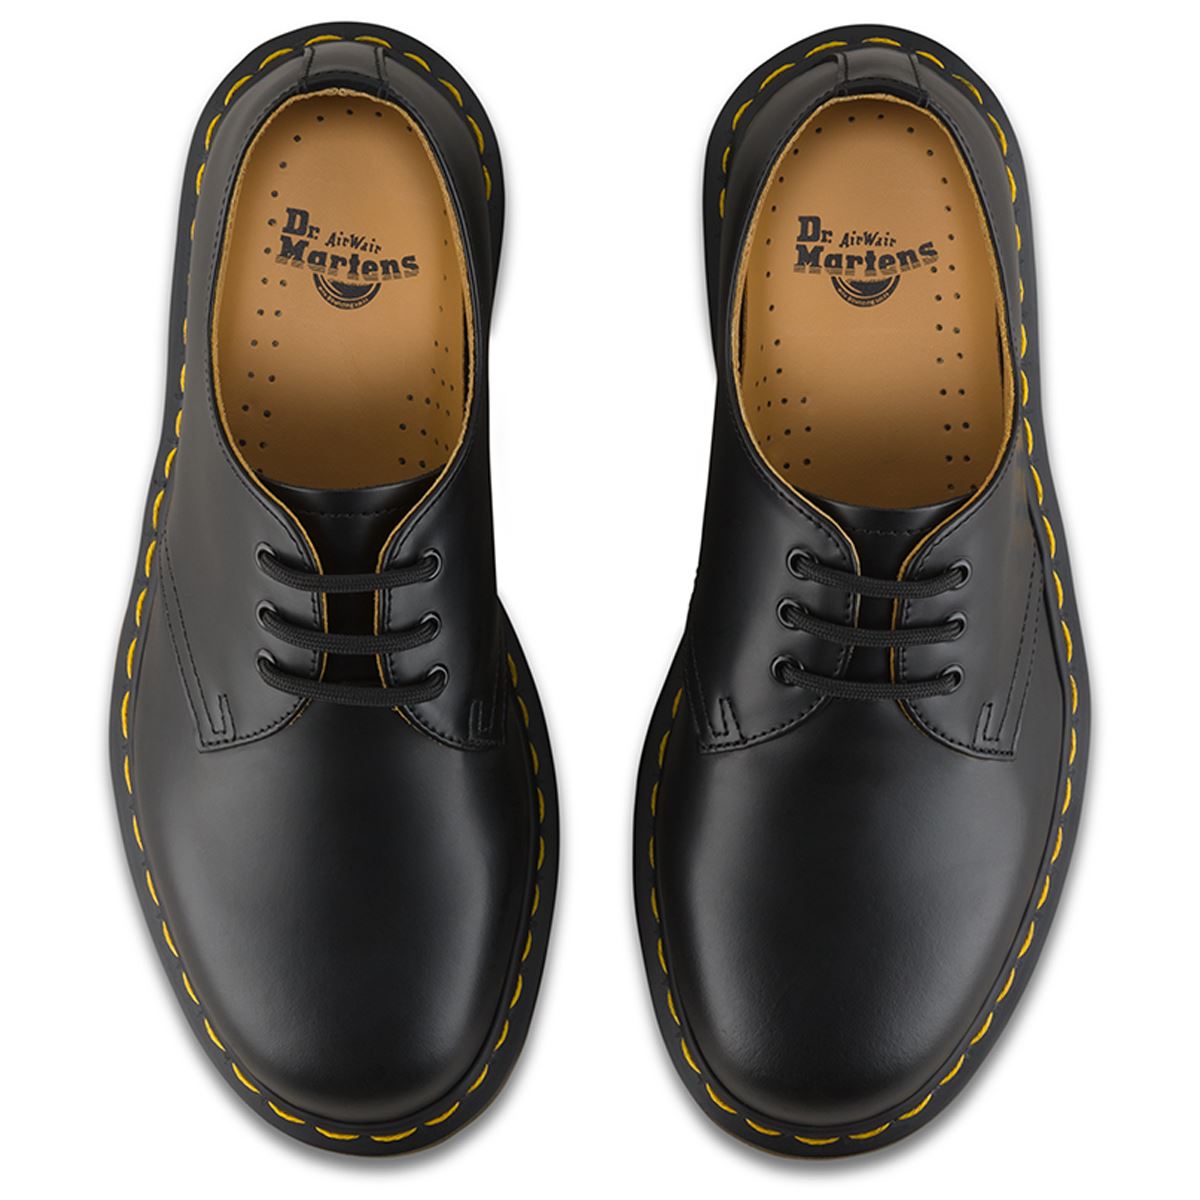 Dr. Martens 1461 Smooth Leather Women's Oxford Shoes#color_black